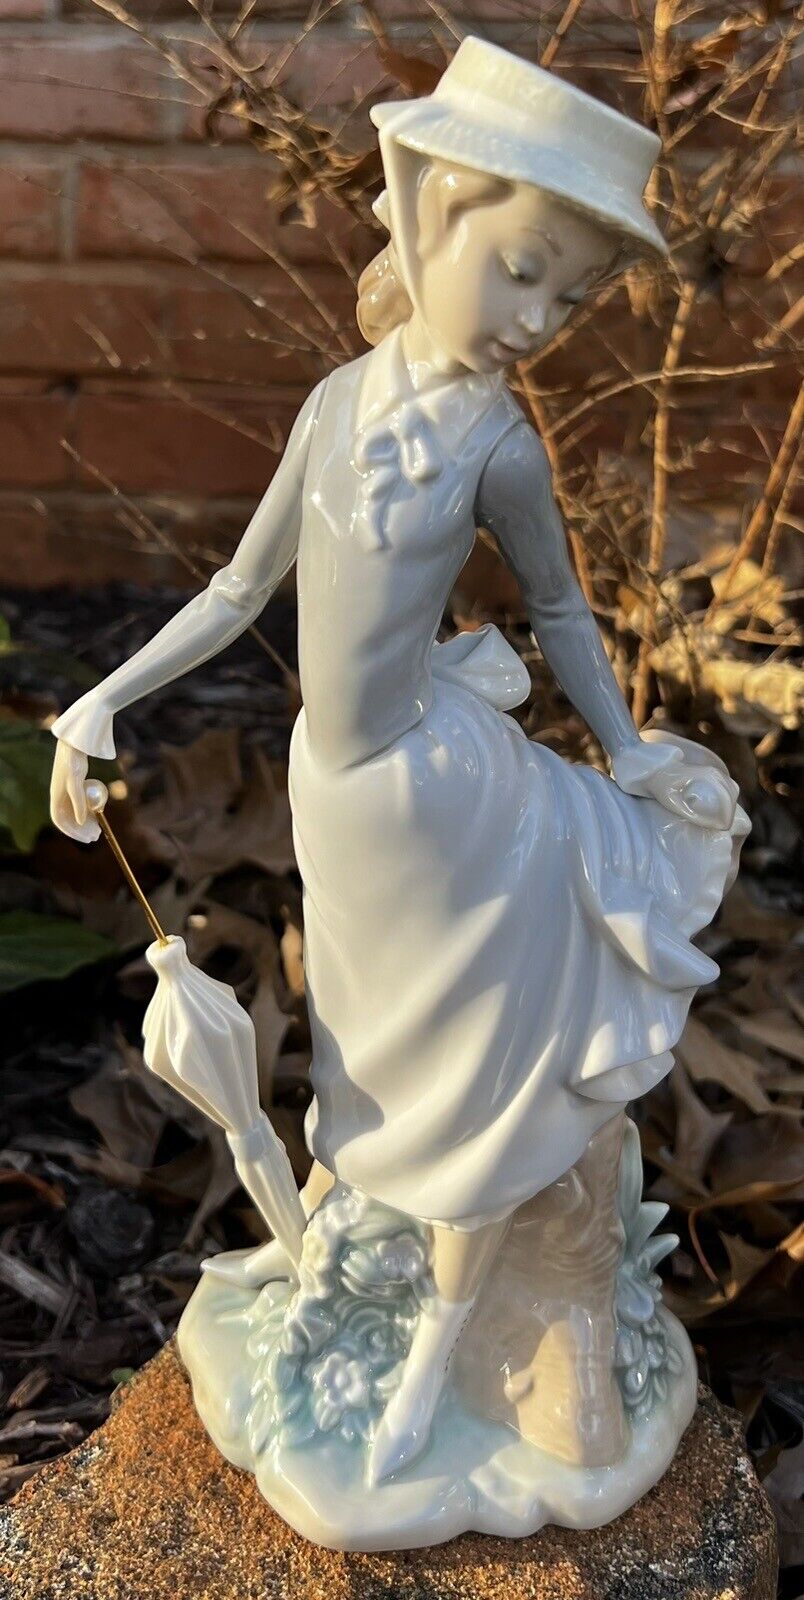 Vintage 1971-1974 Lladro “Young Lady in Trouble” Porcelain Figurine 4912